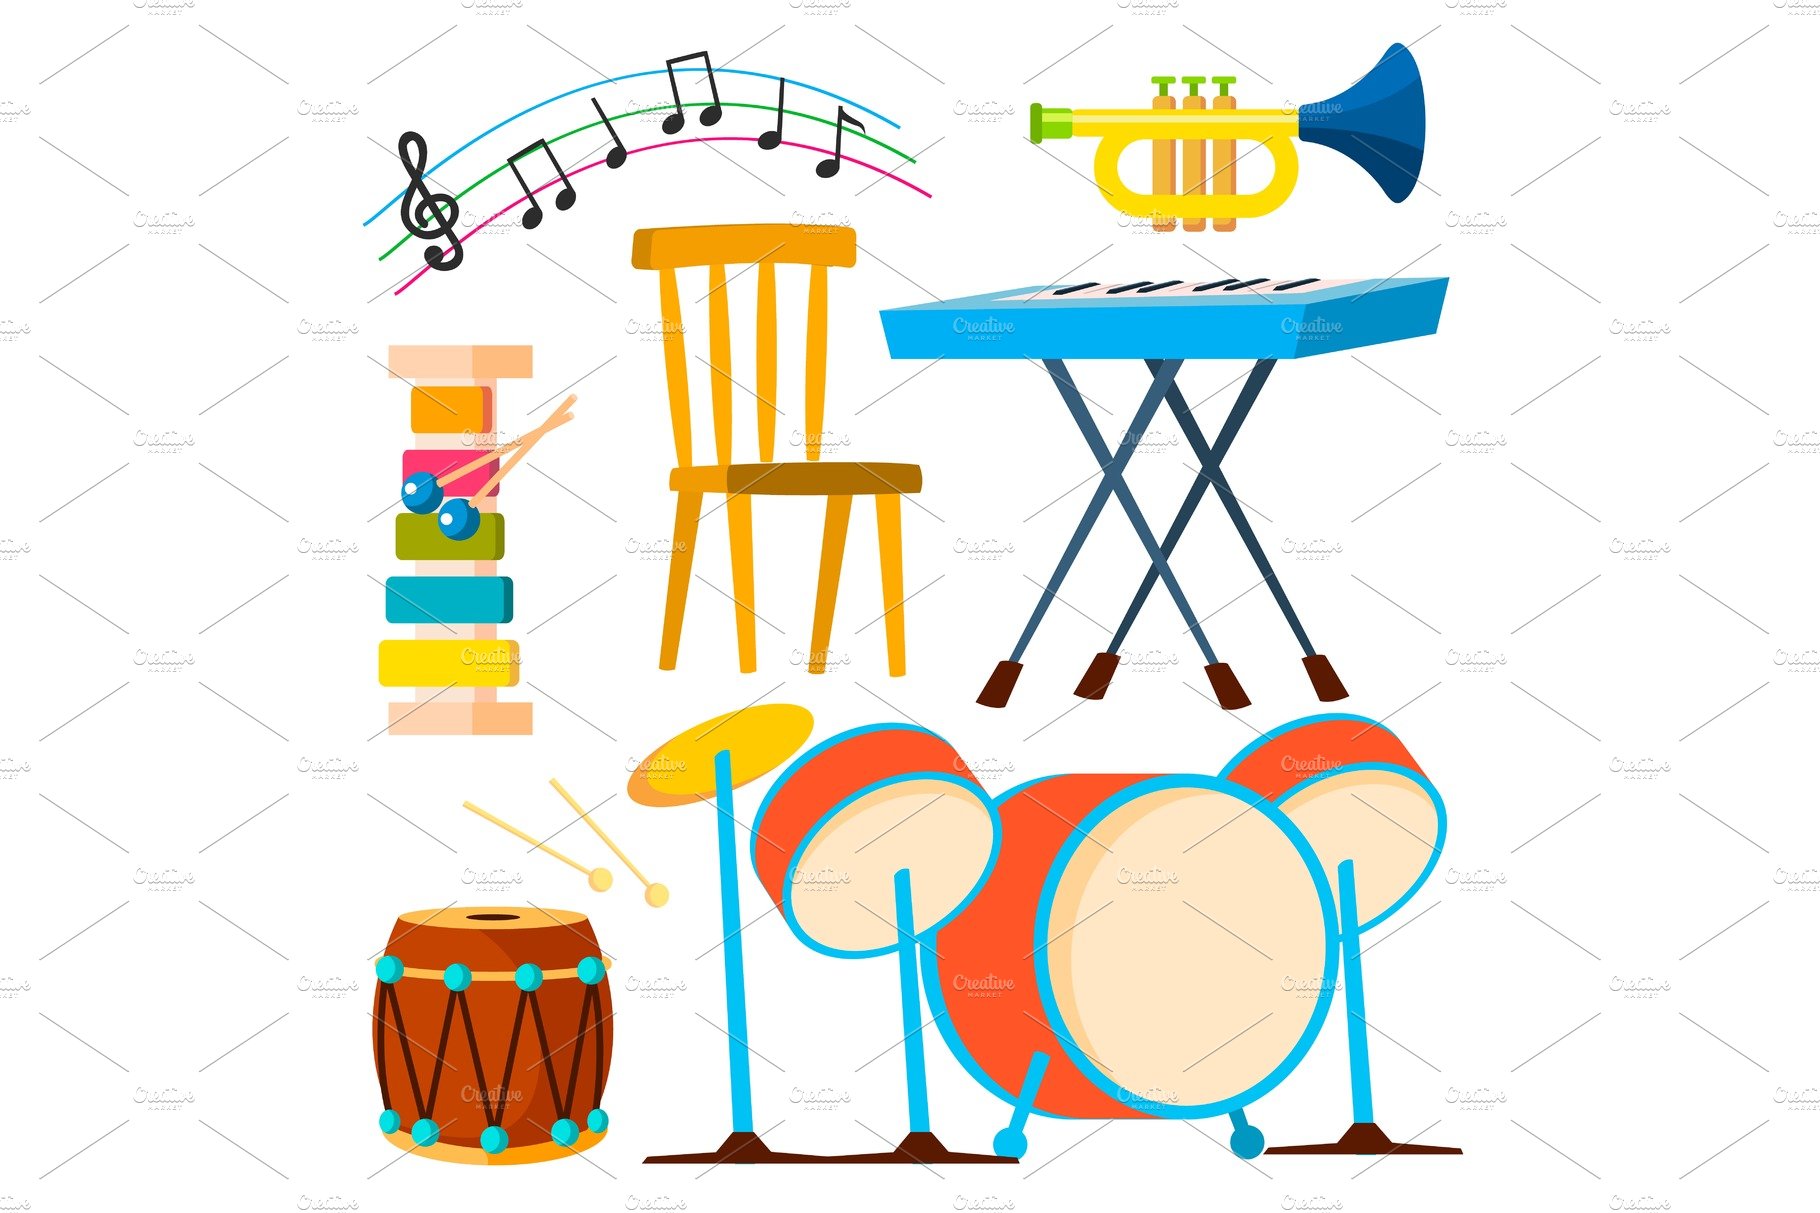 Musical Instruments Drum Keyboard cover image.